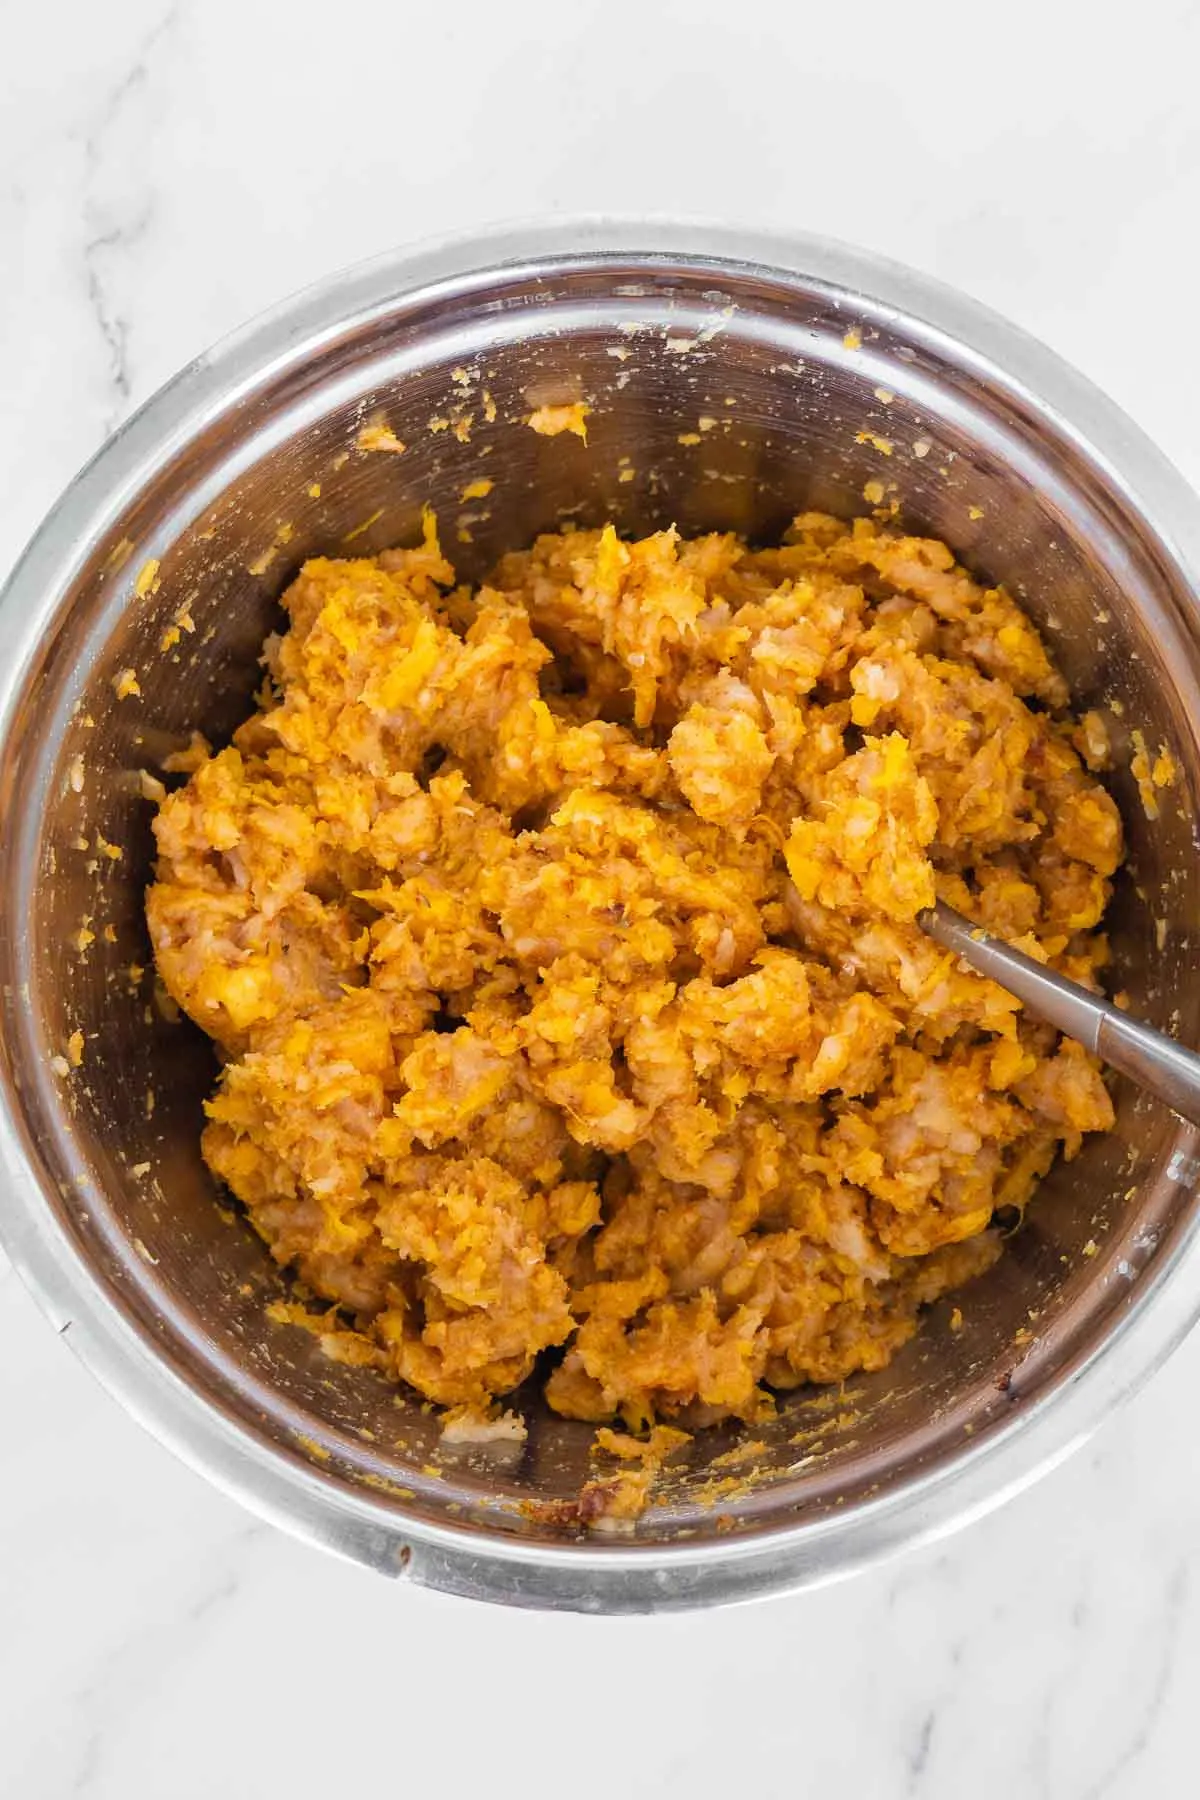 Mixture to make sweet potato chicken nuggets in a bowl.